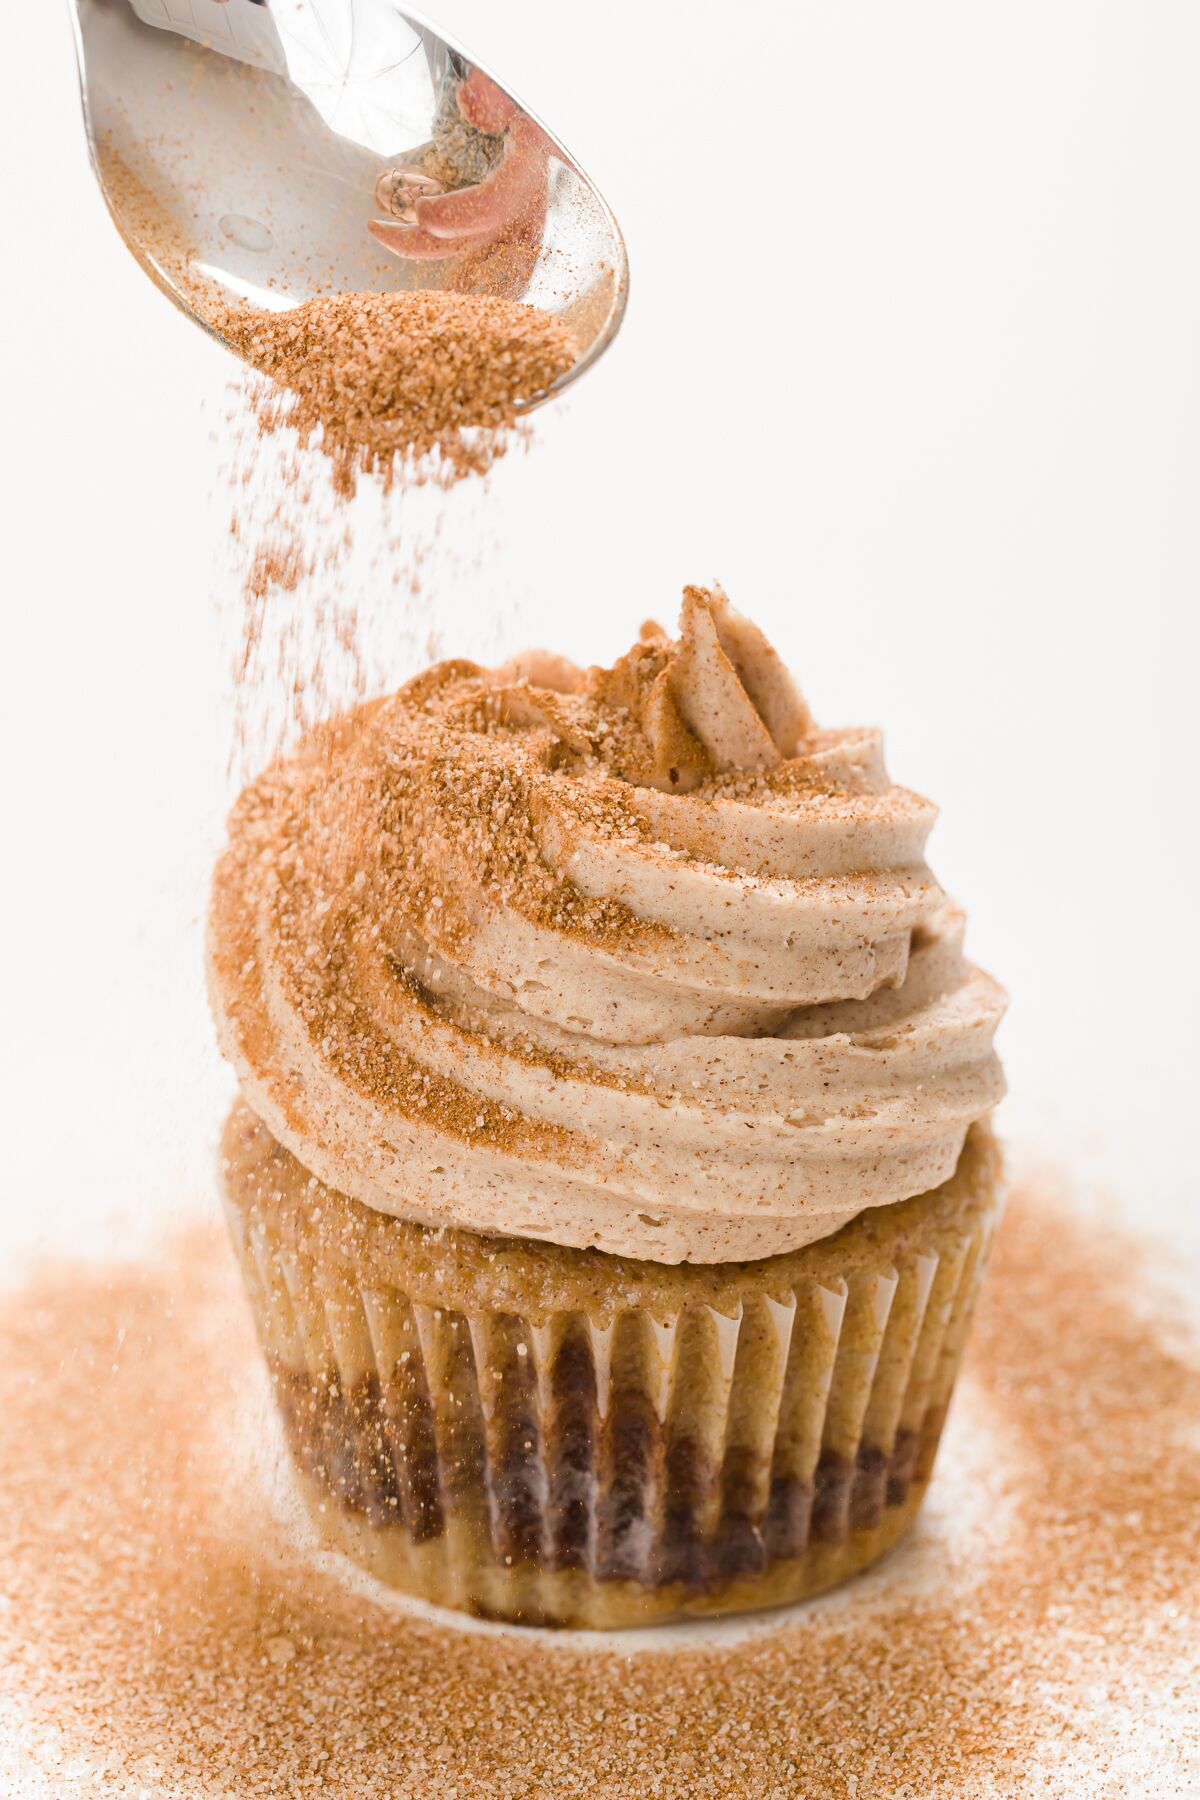 Cinnamon and Sugar being dusted over cinnamon buttercream frosting on a cupcake